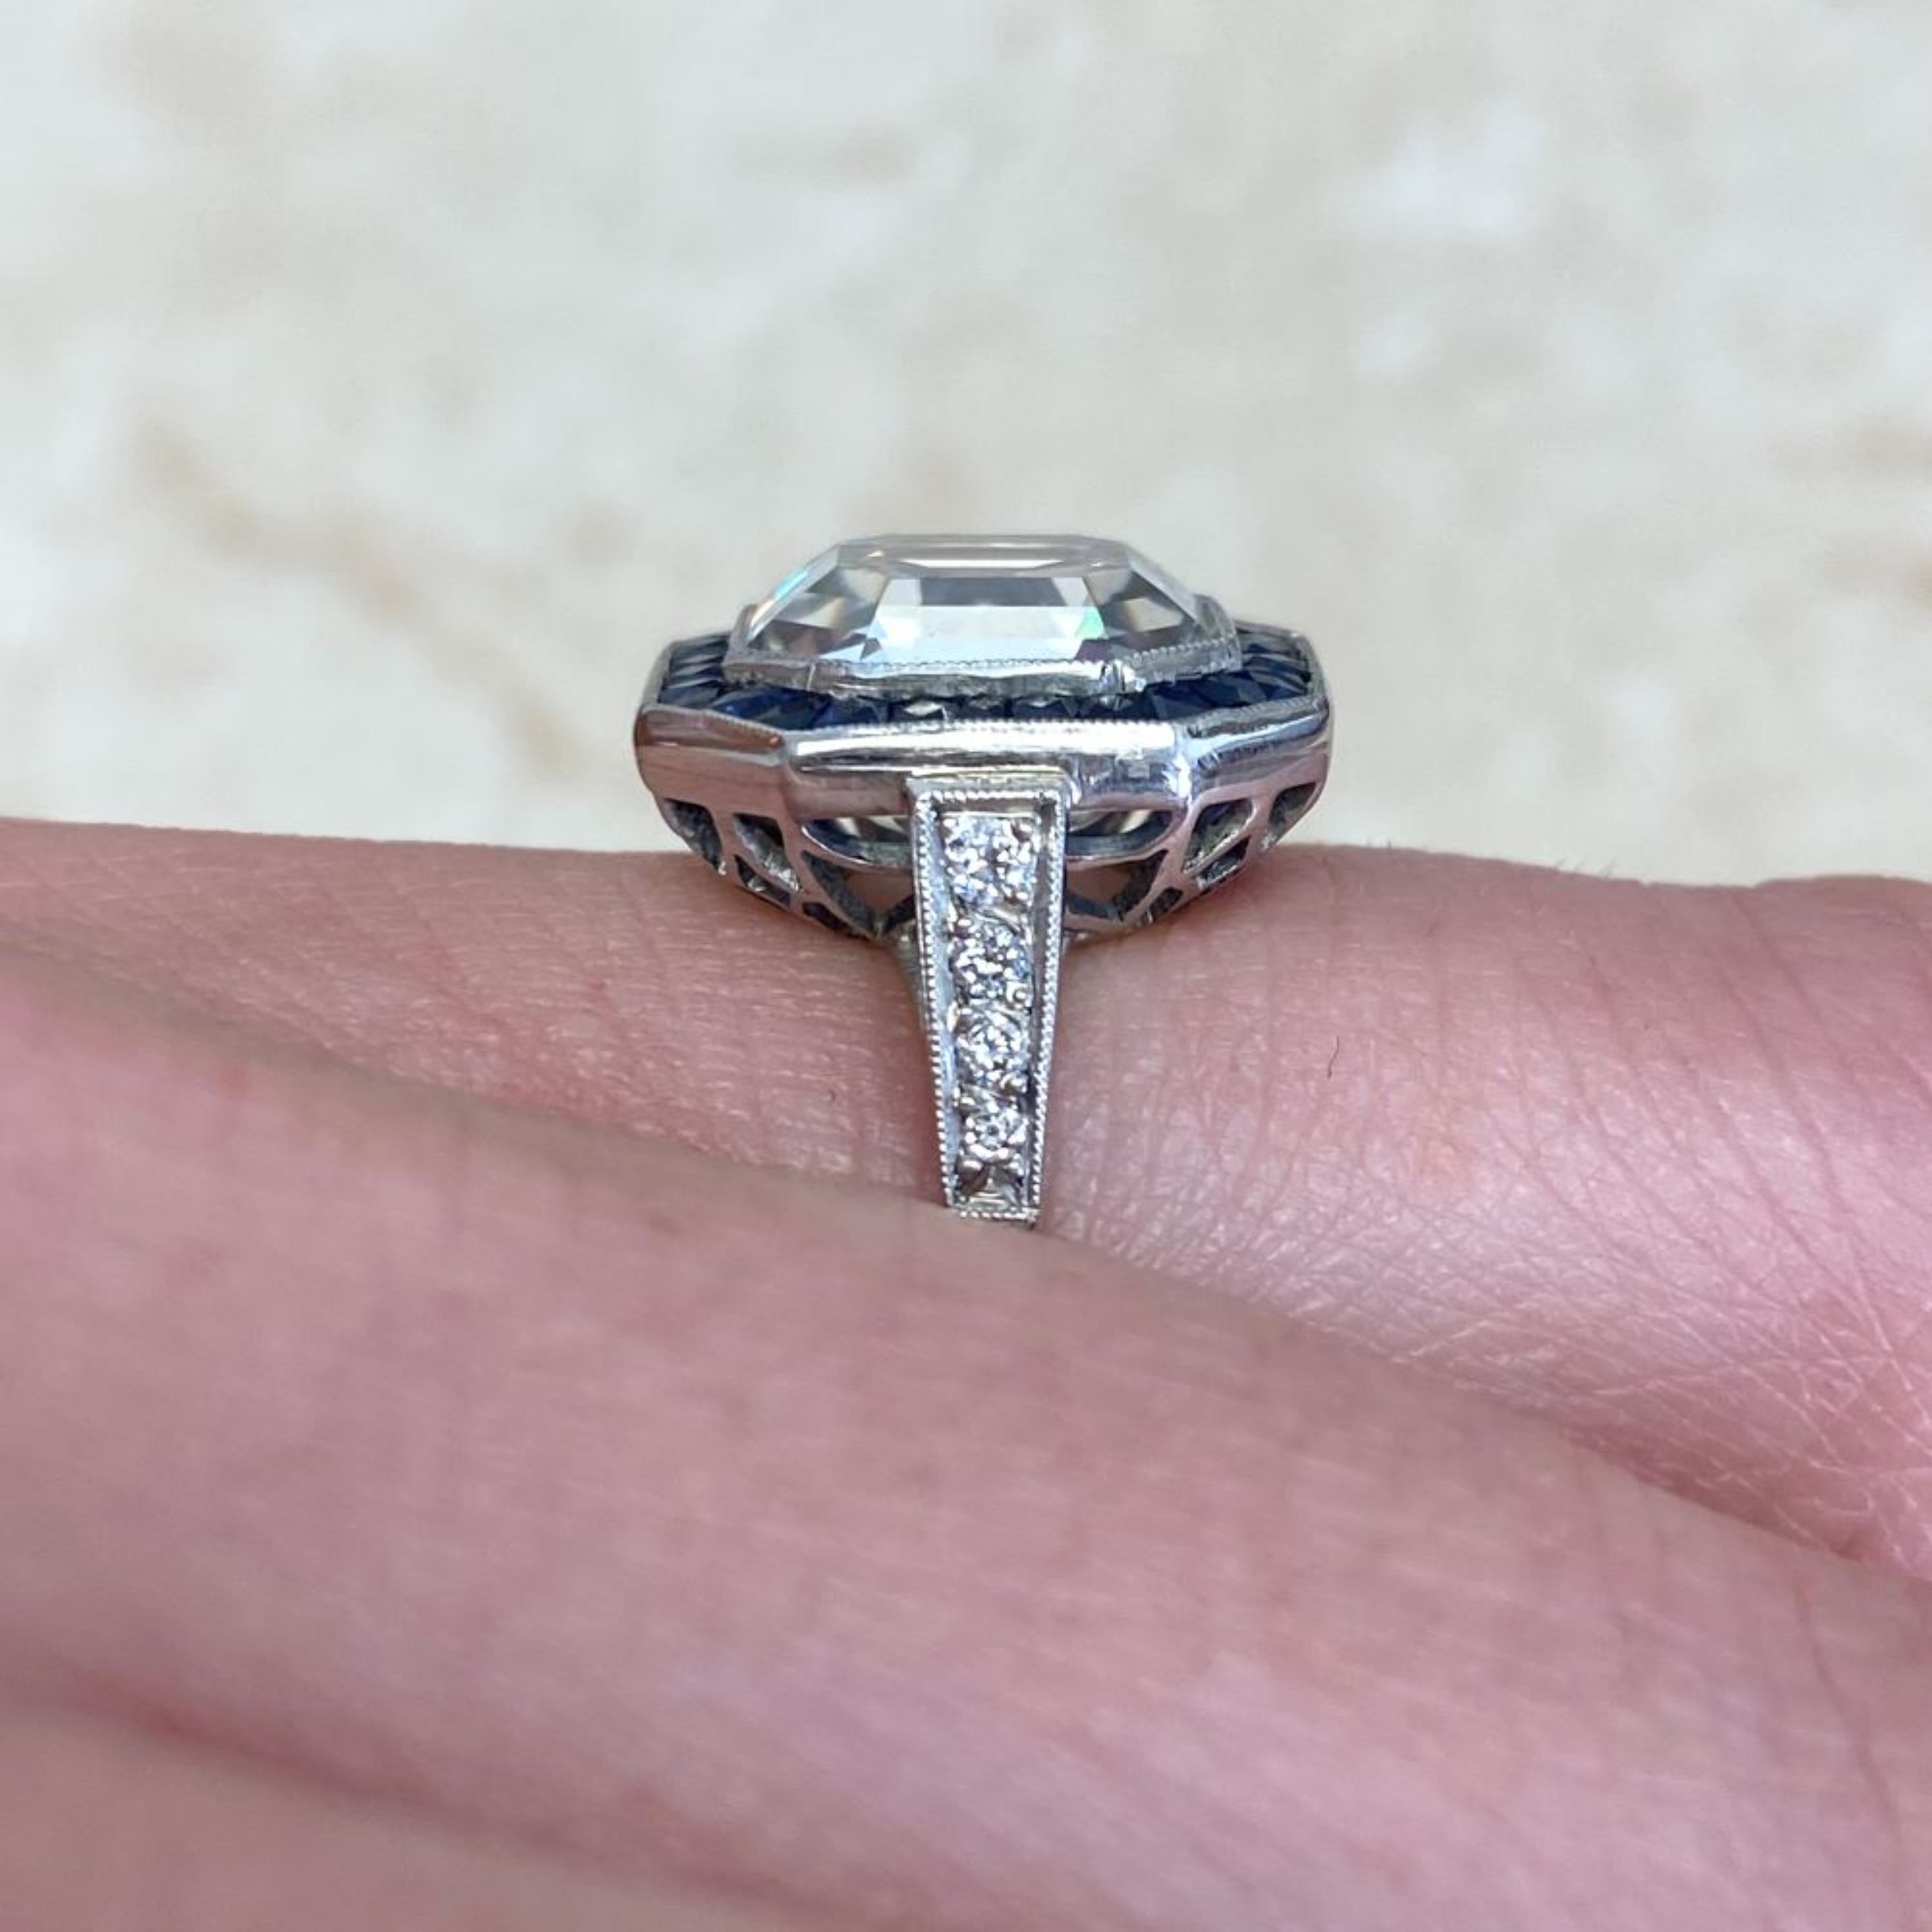 GIA Certified Giant 5.06 Carat Asscher Cut Halo Diamond Sapphire Engagement Ring

A stunning ring featuring IGI/GIA Certified 4.05 Carat Natural Diamond and 1.01 Carat of Ceylon Sapphire Accents set in Platinum Along with Four European cut diamonds